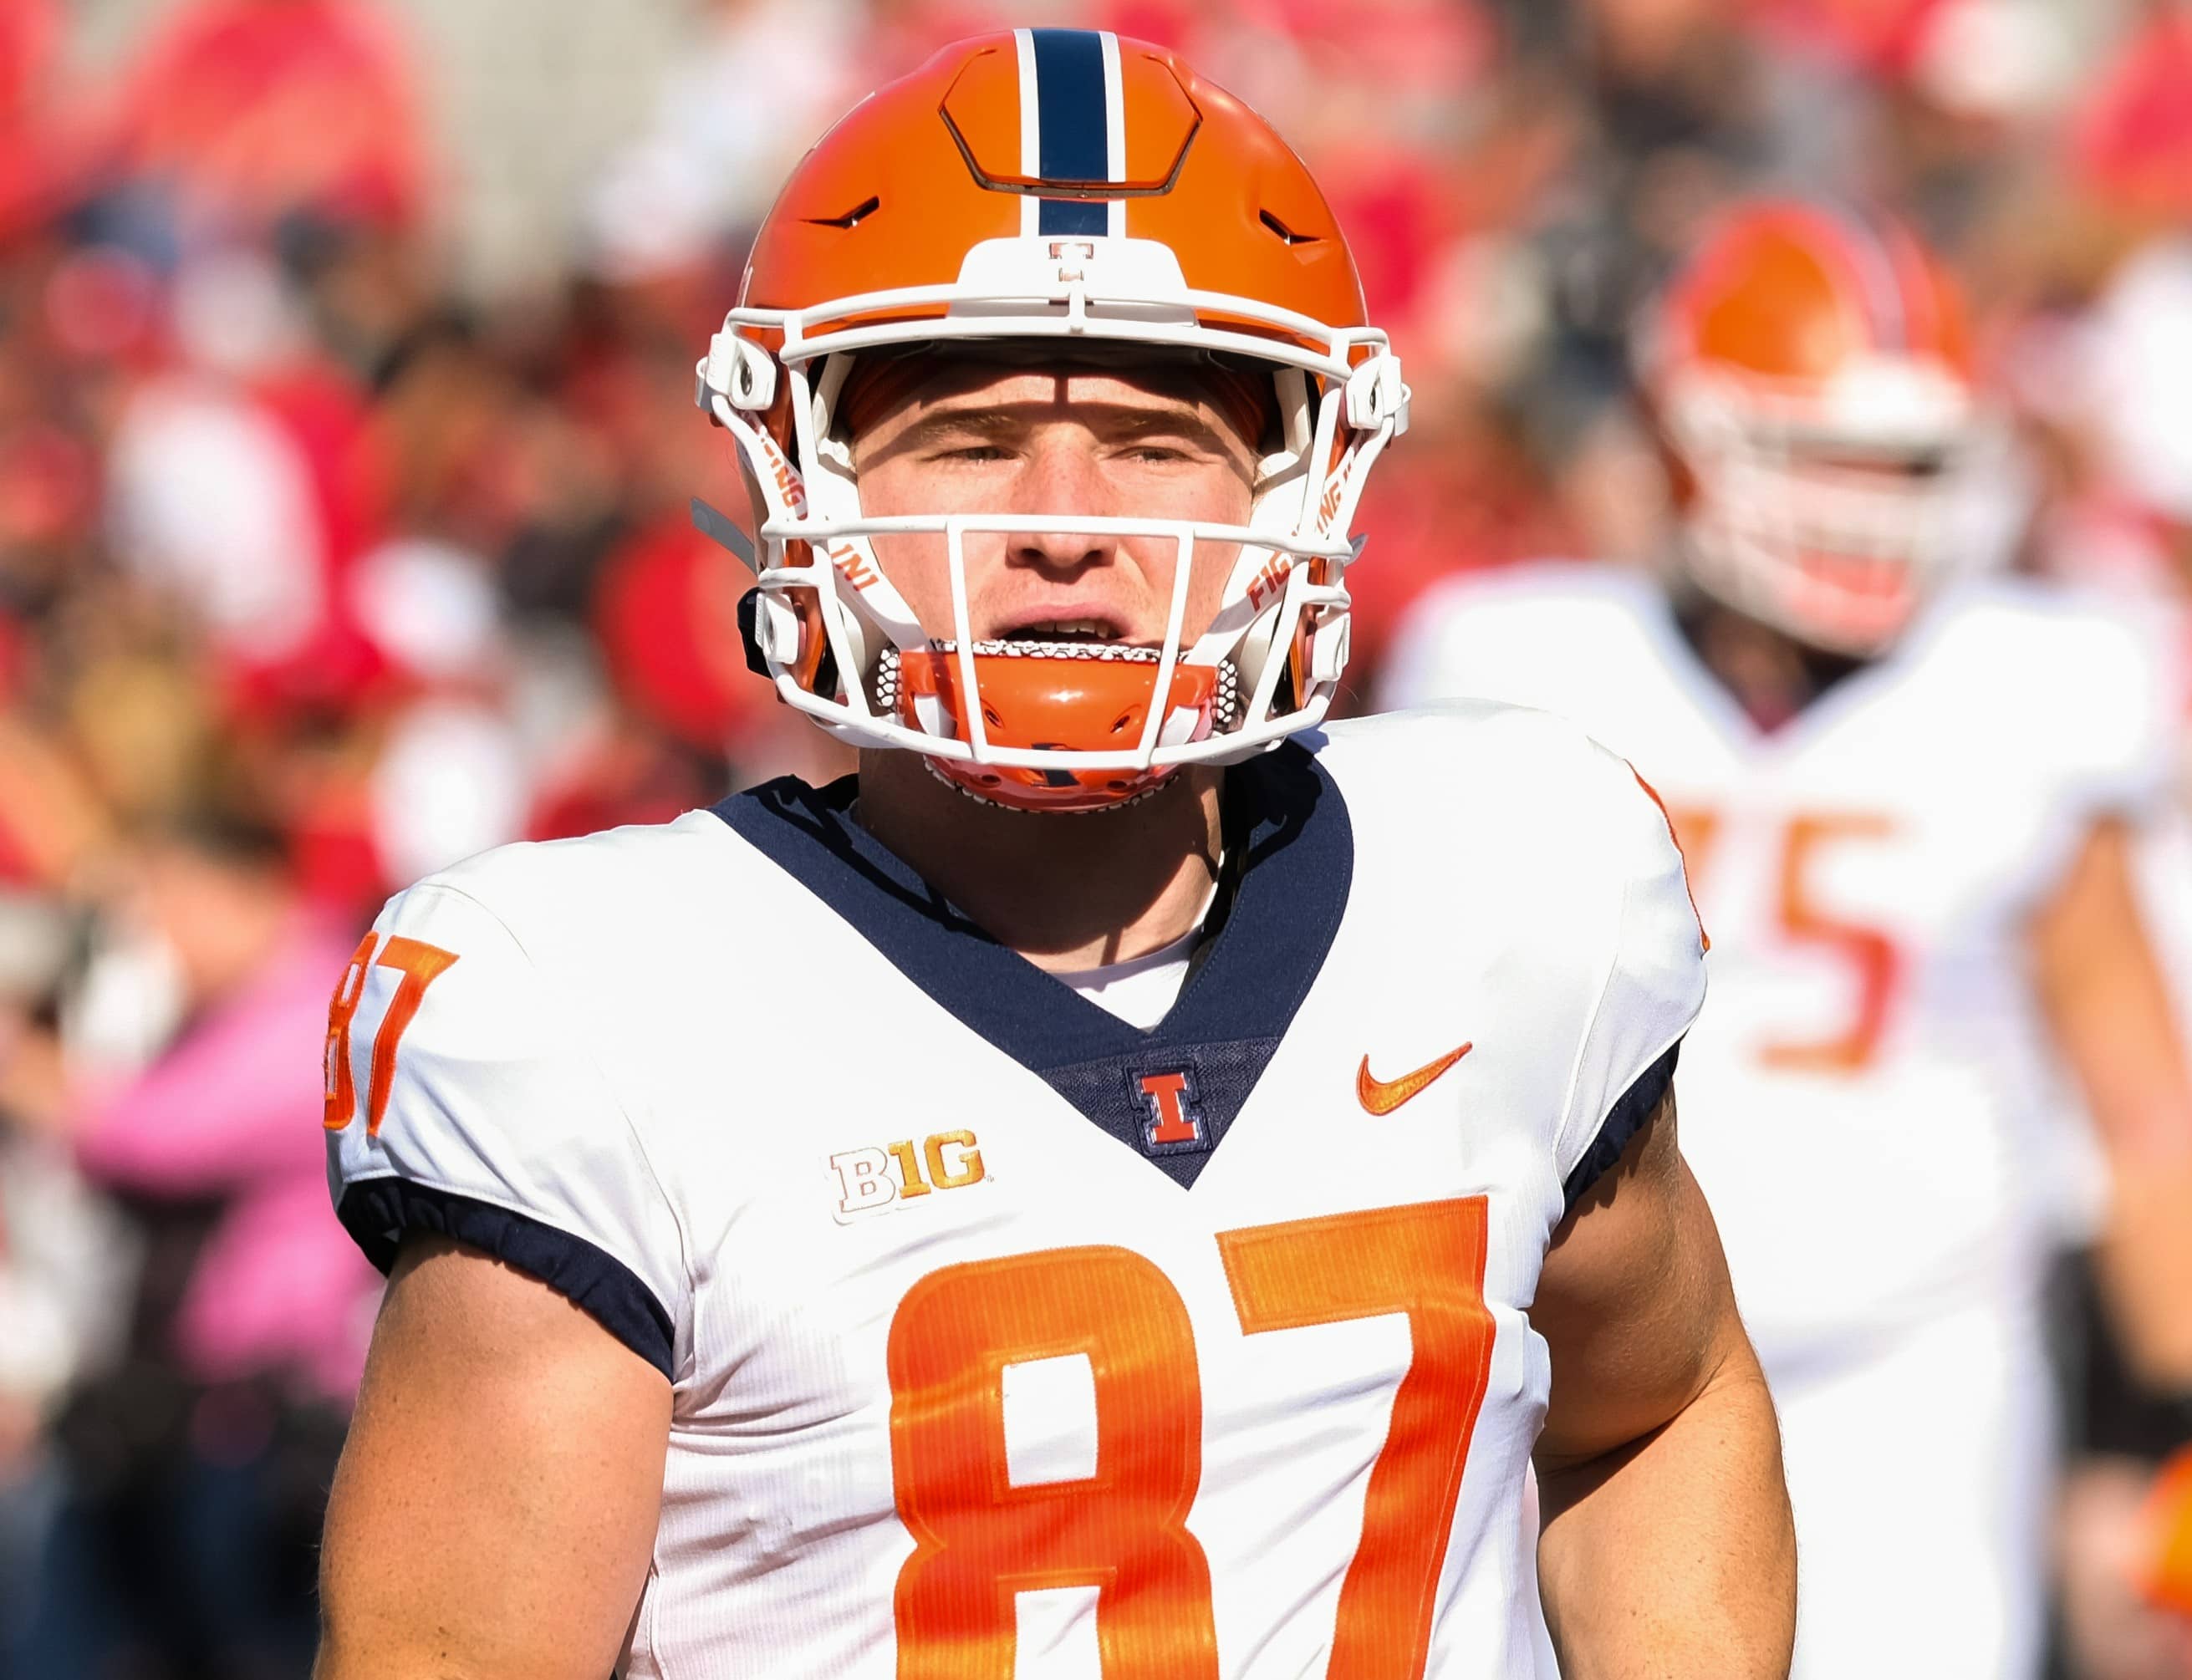 Audio Interview With Kody Case Of Illinois After Nebraska Game Cb Sports